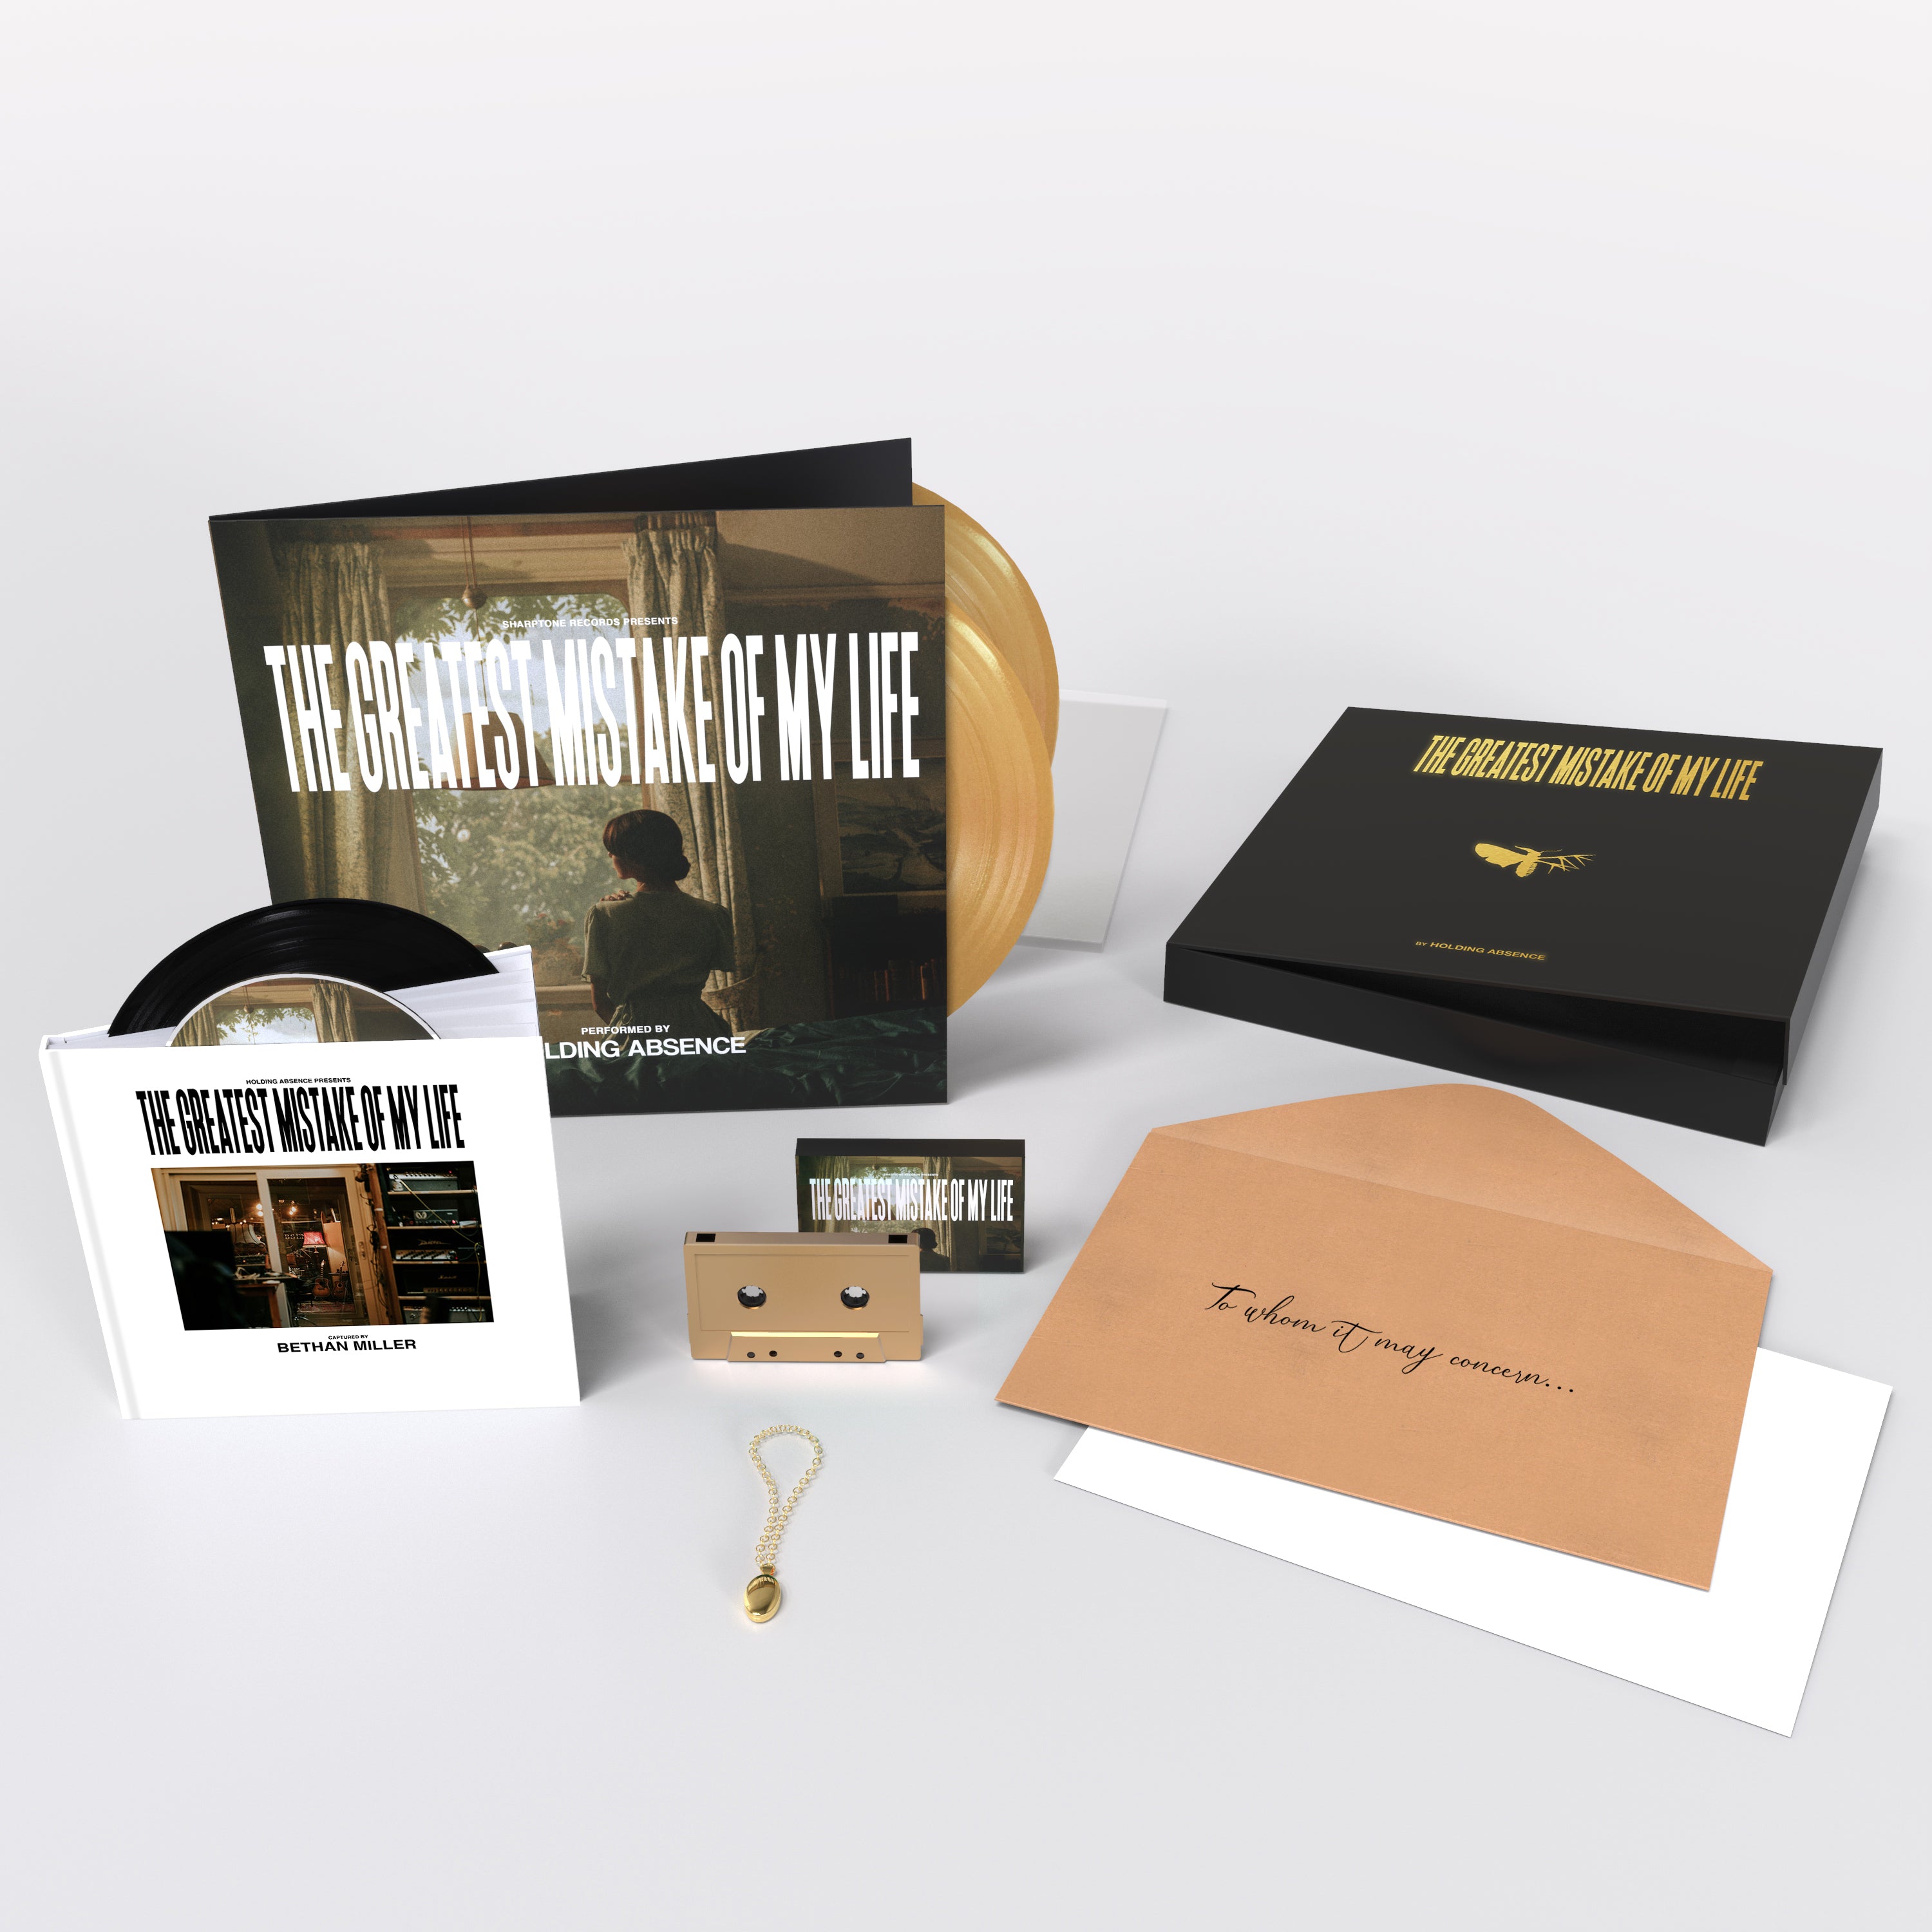 Holding Absence - 'The Greatest Mistake Of My Life' Limited Edition Box Set